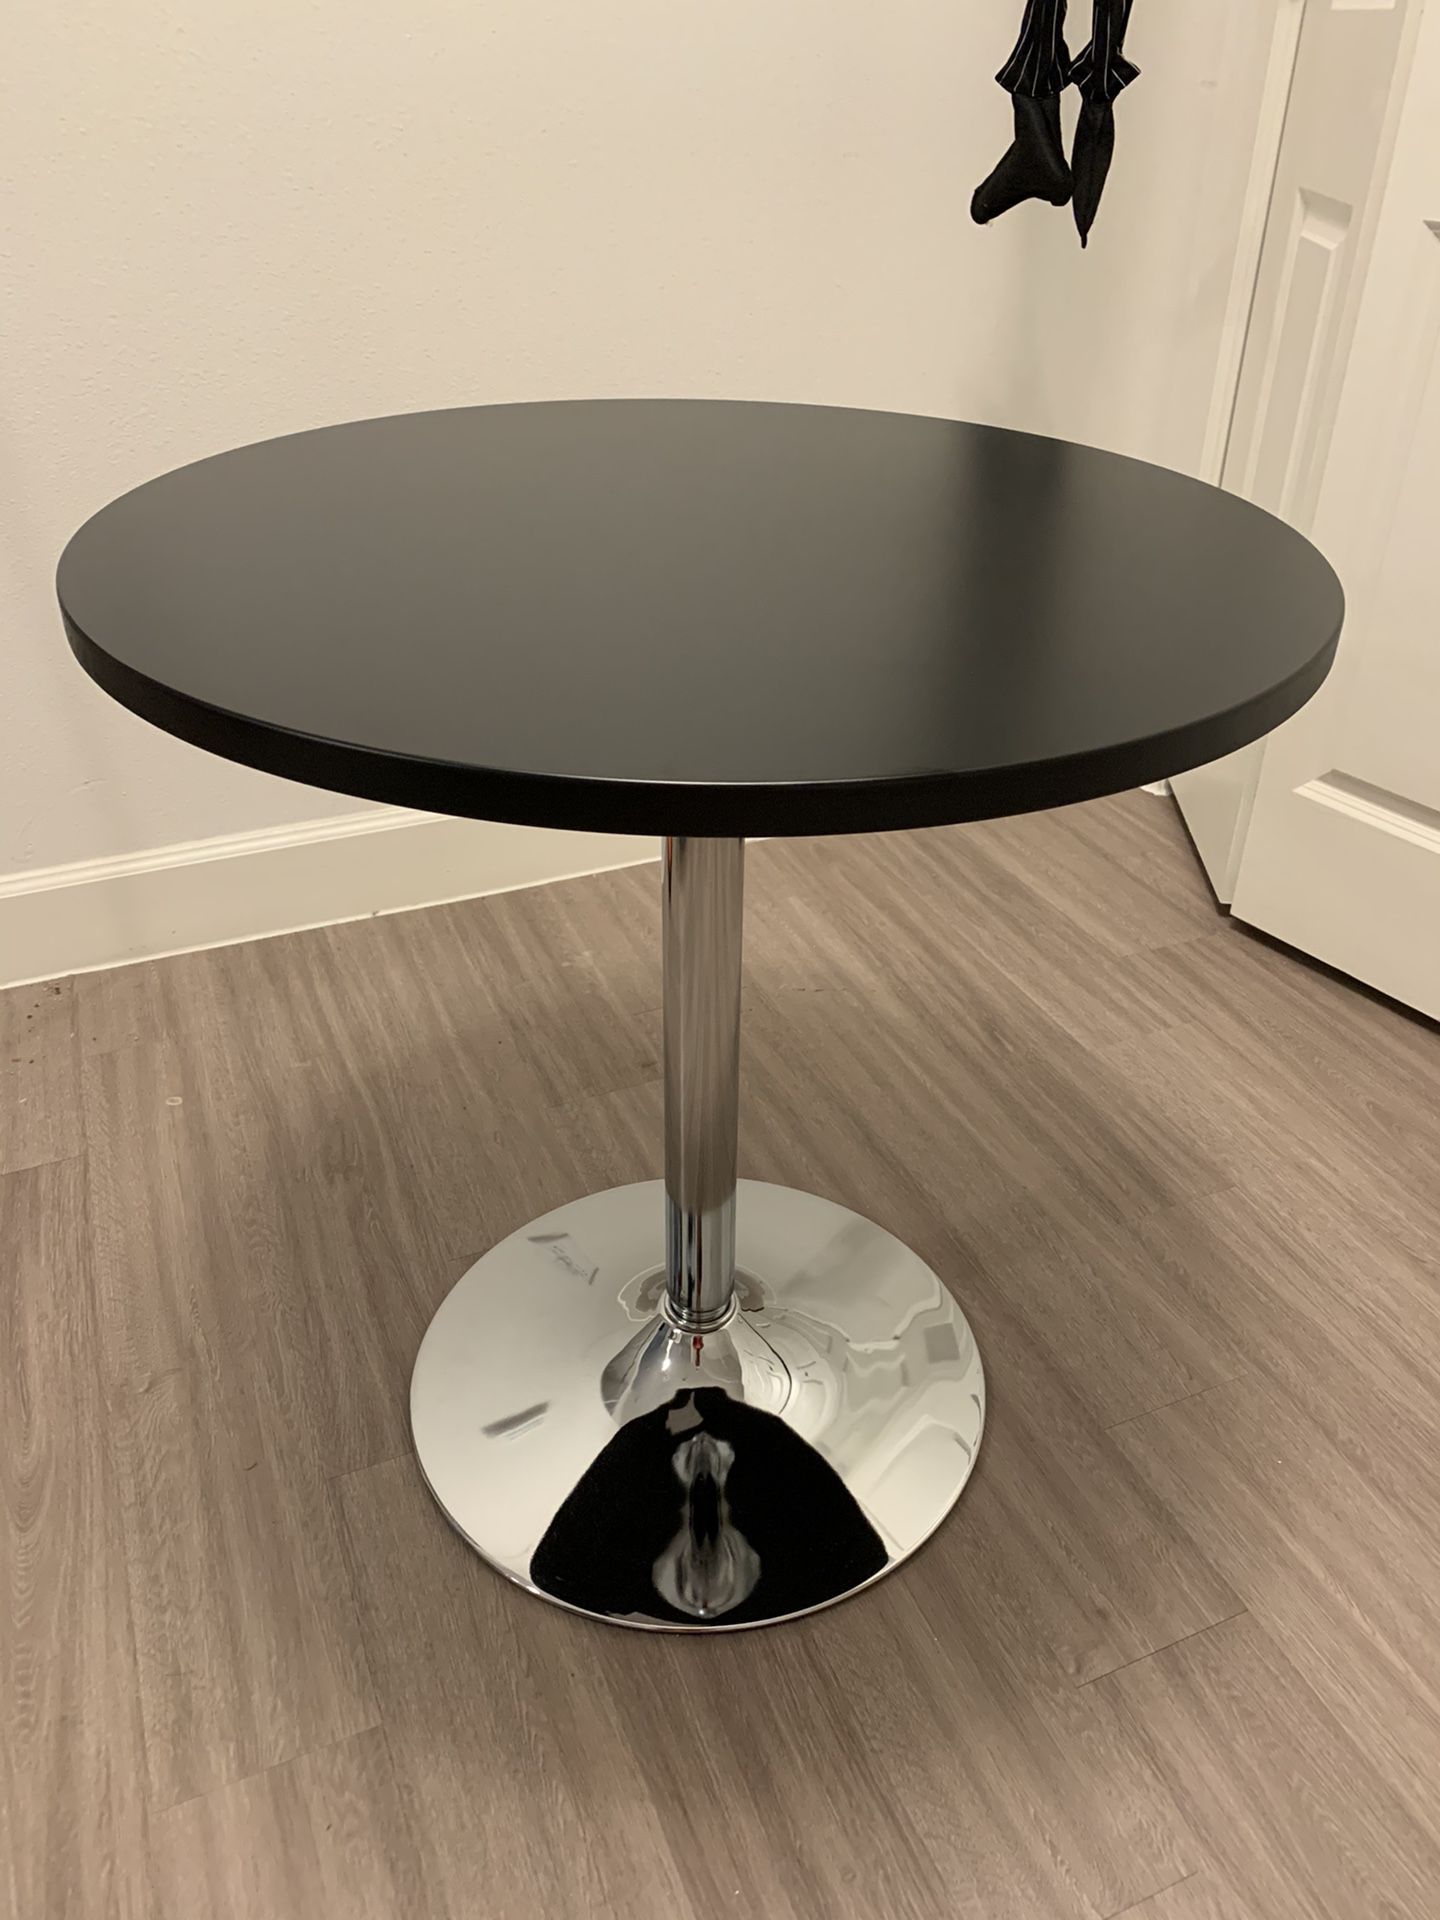 Brand new table